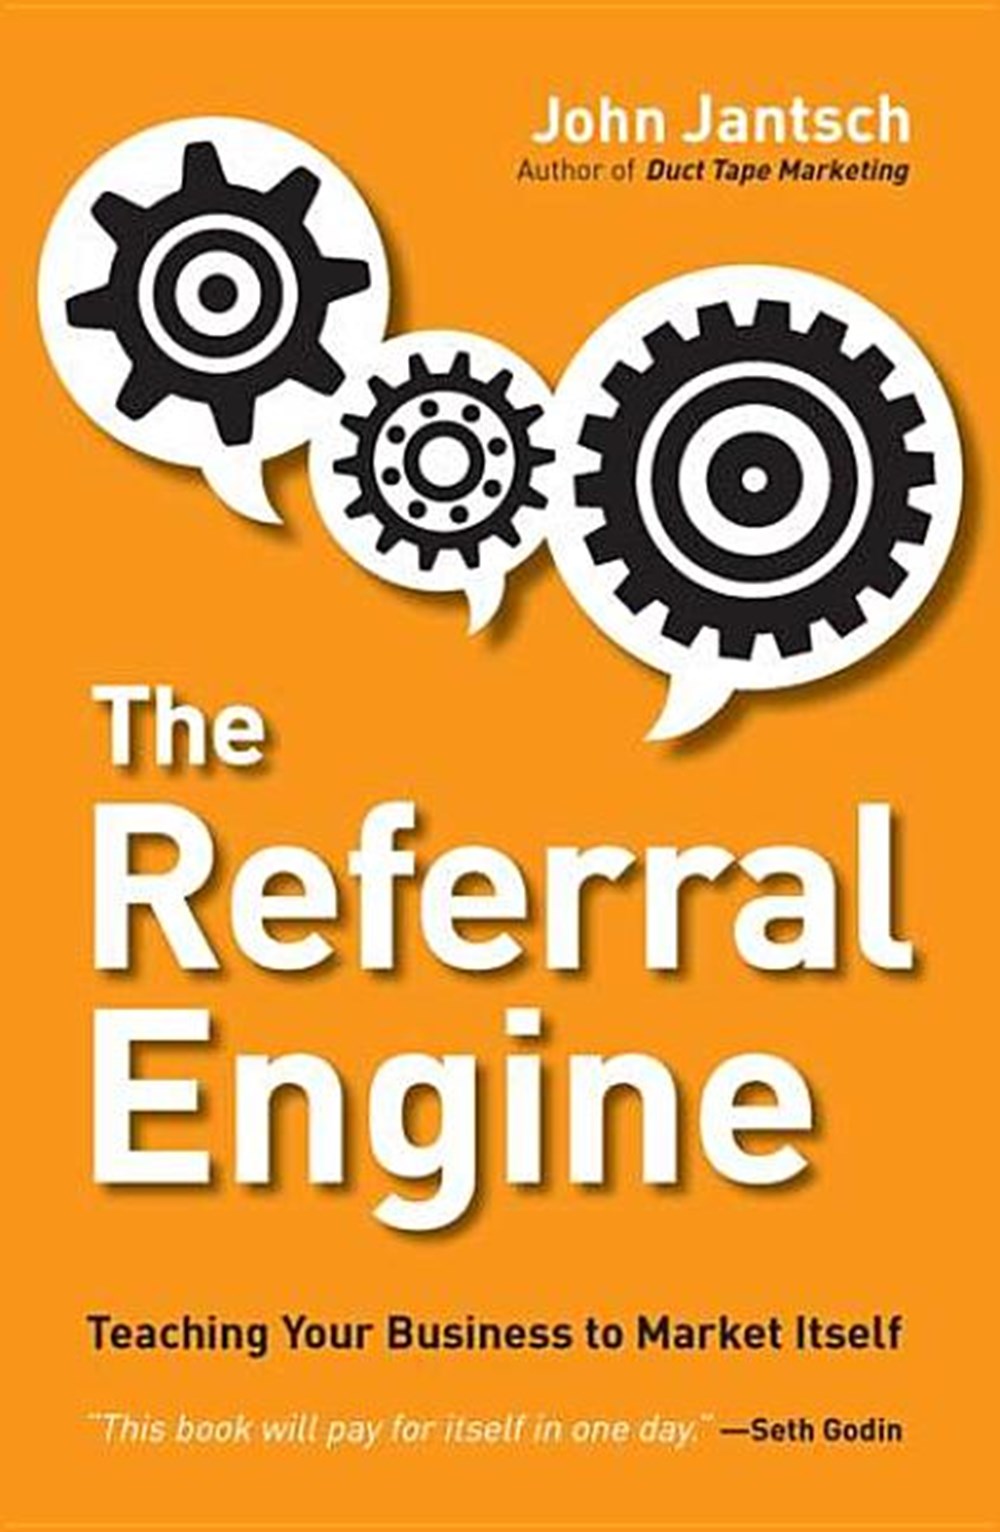 Referral Engine Teaching Your Business to Market Itself